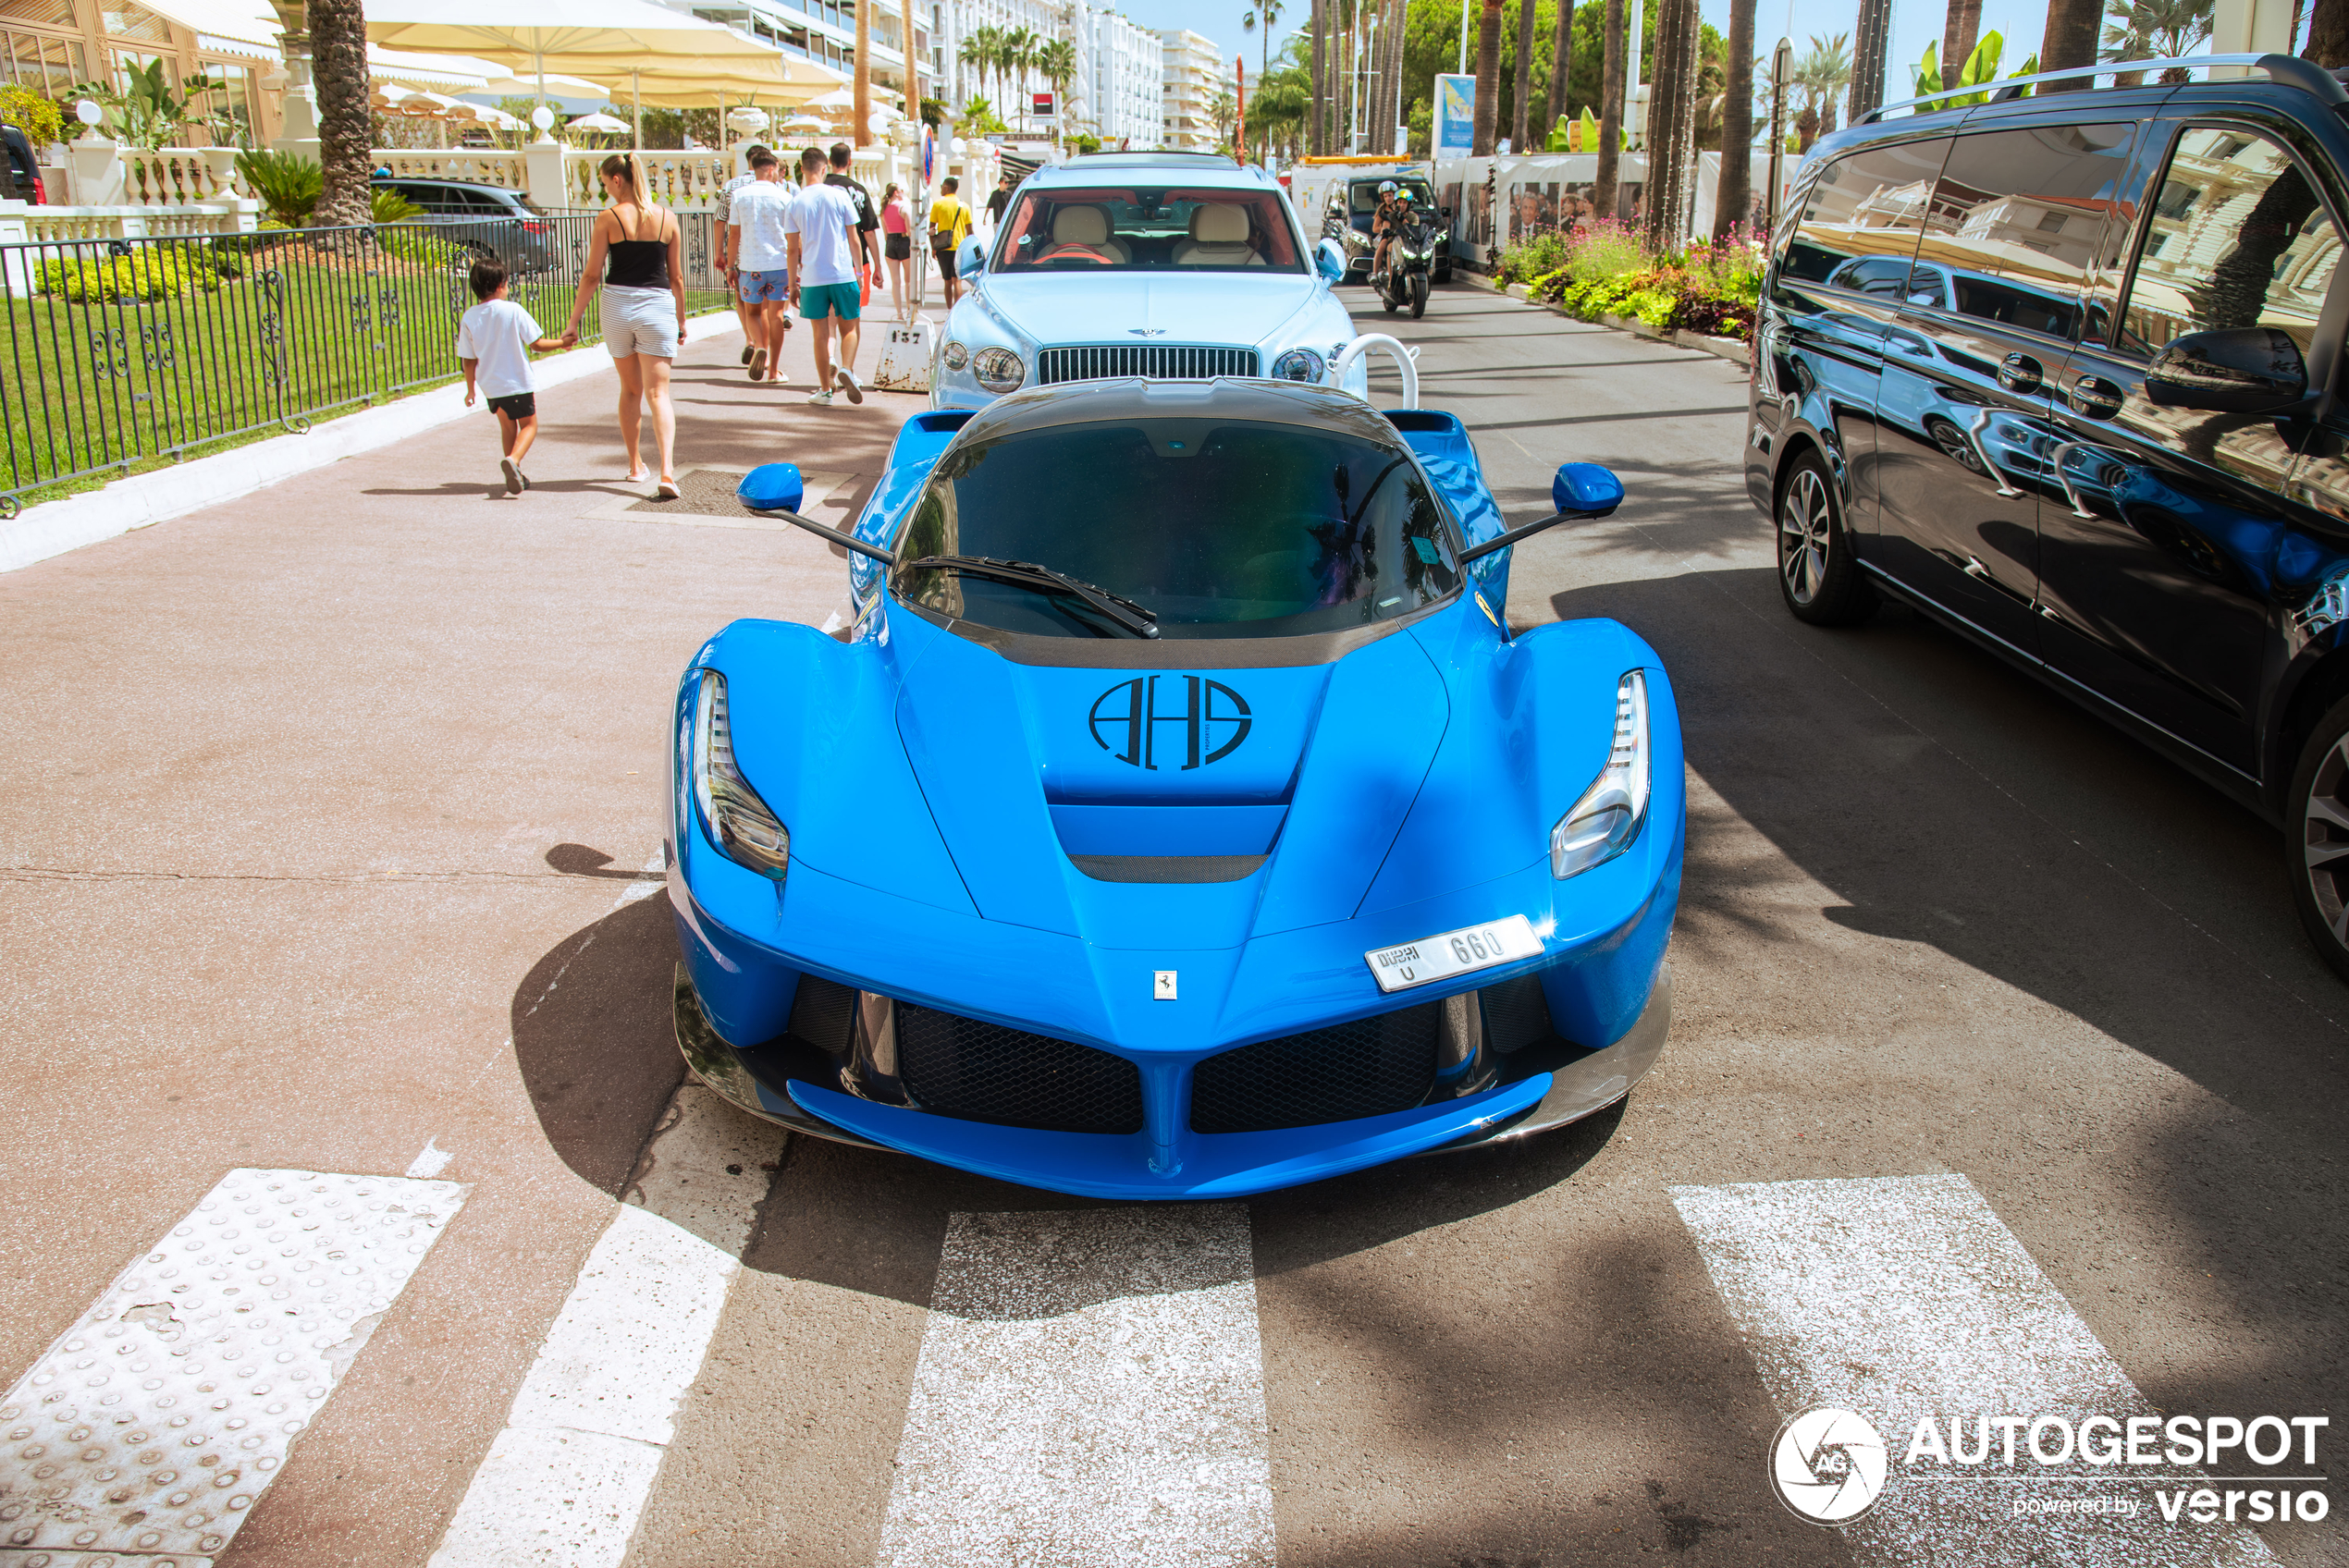 A beautiful Laferrari shows up in Cannes